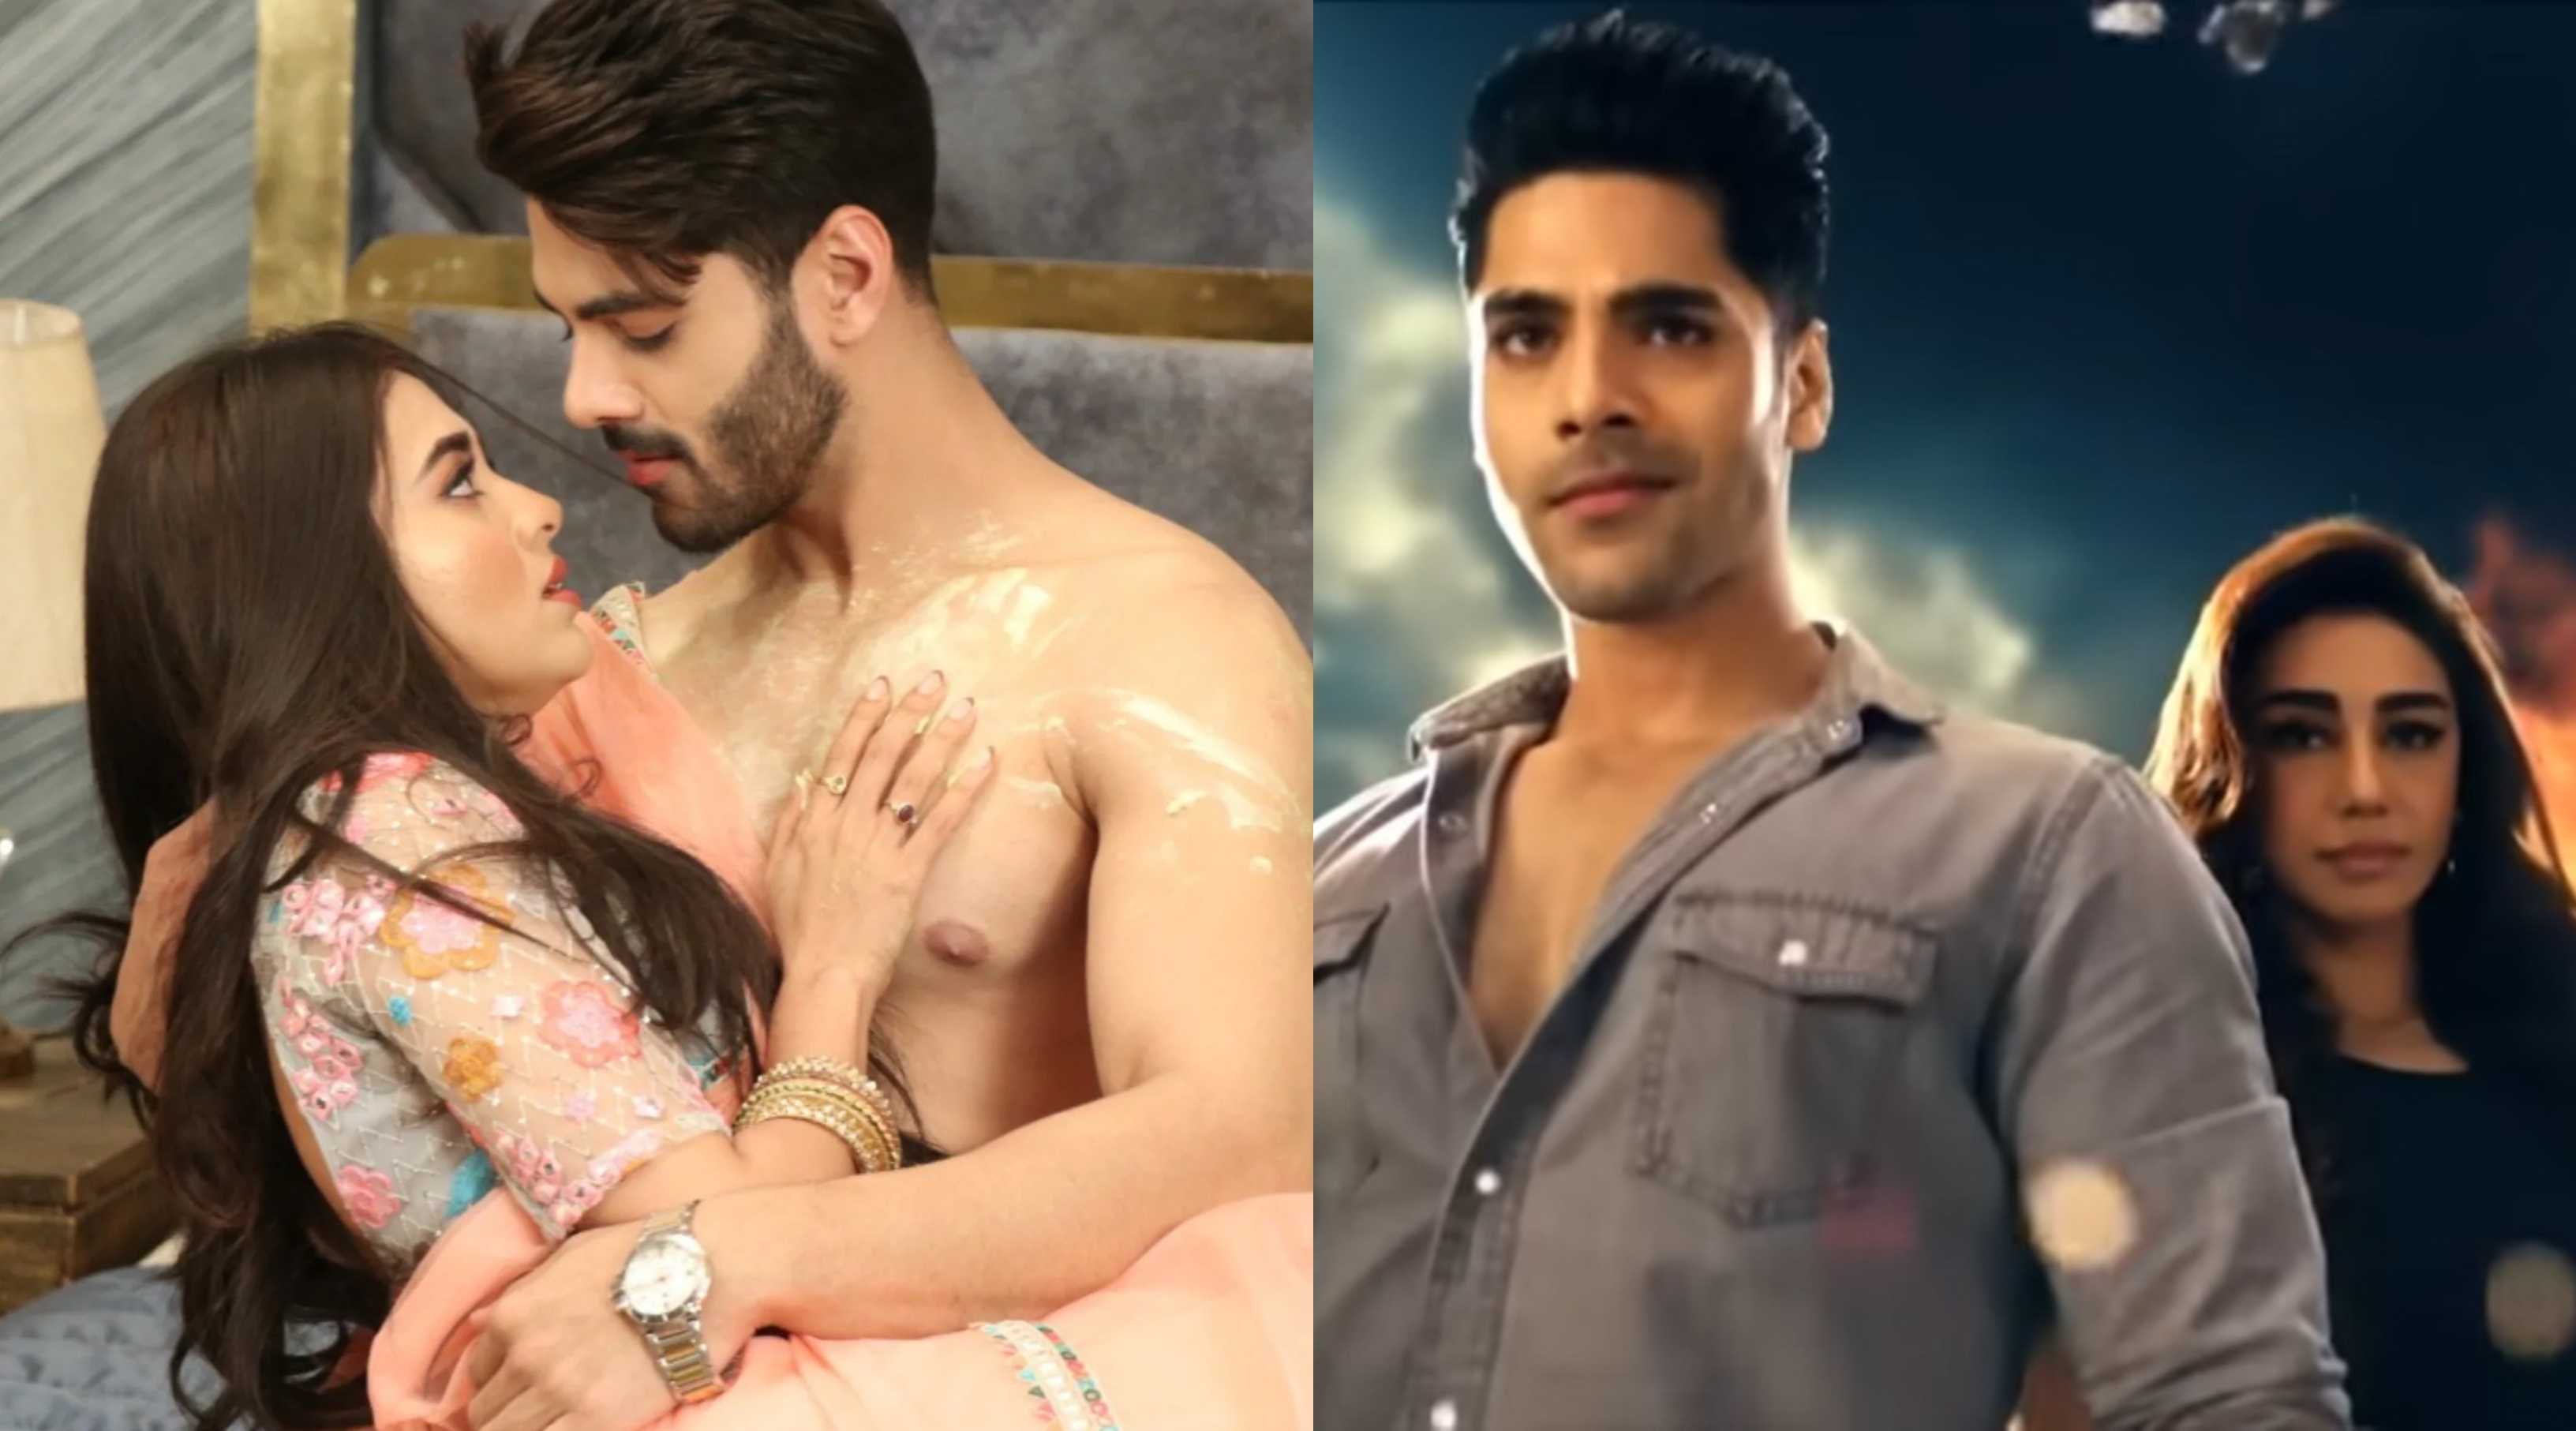 Naagin 6: Tejasswi Prakash to be betrayed by Simba Nagpal’s evil twin, not her husband Rishabh? Here’s what we know